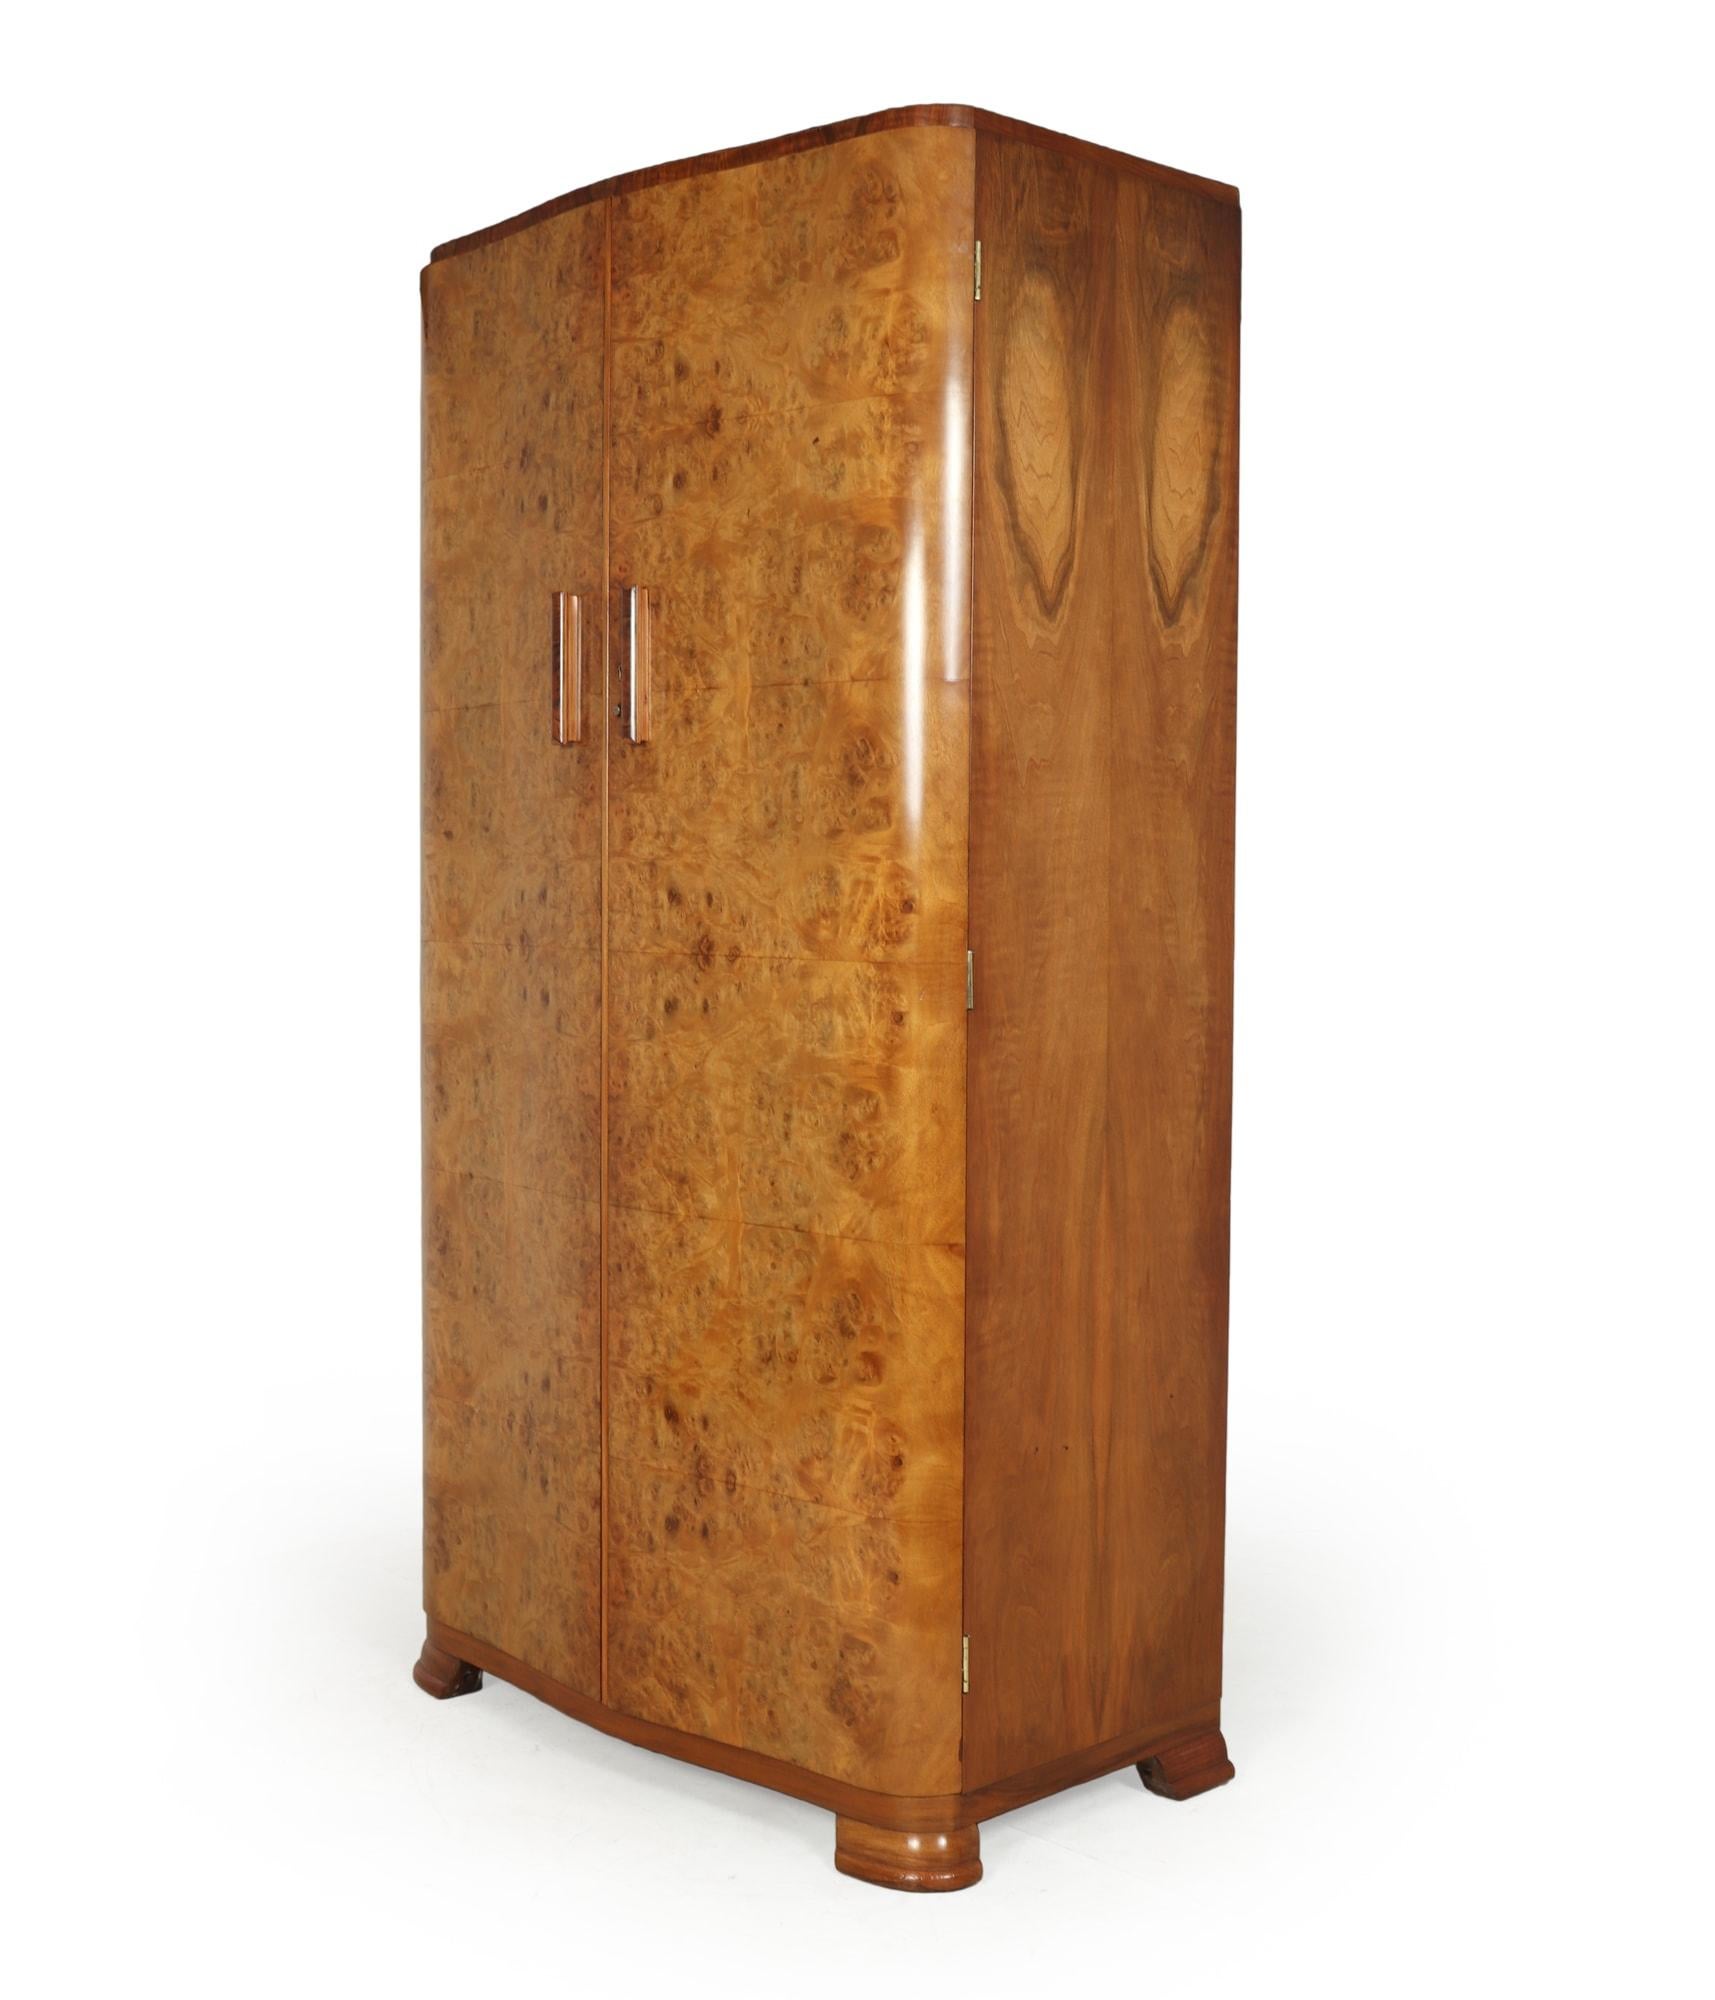 A serpentine fronted gentleman’s fitted wardrobe solid wood handles standing on bracket feet the wardrobe is very good quality with a fully fitted interior. The wardrobe has been restored where necessary and fully hand polished

Age: